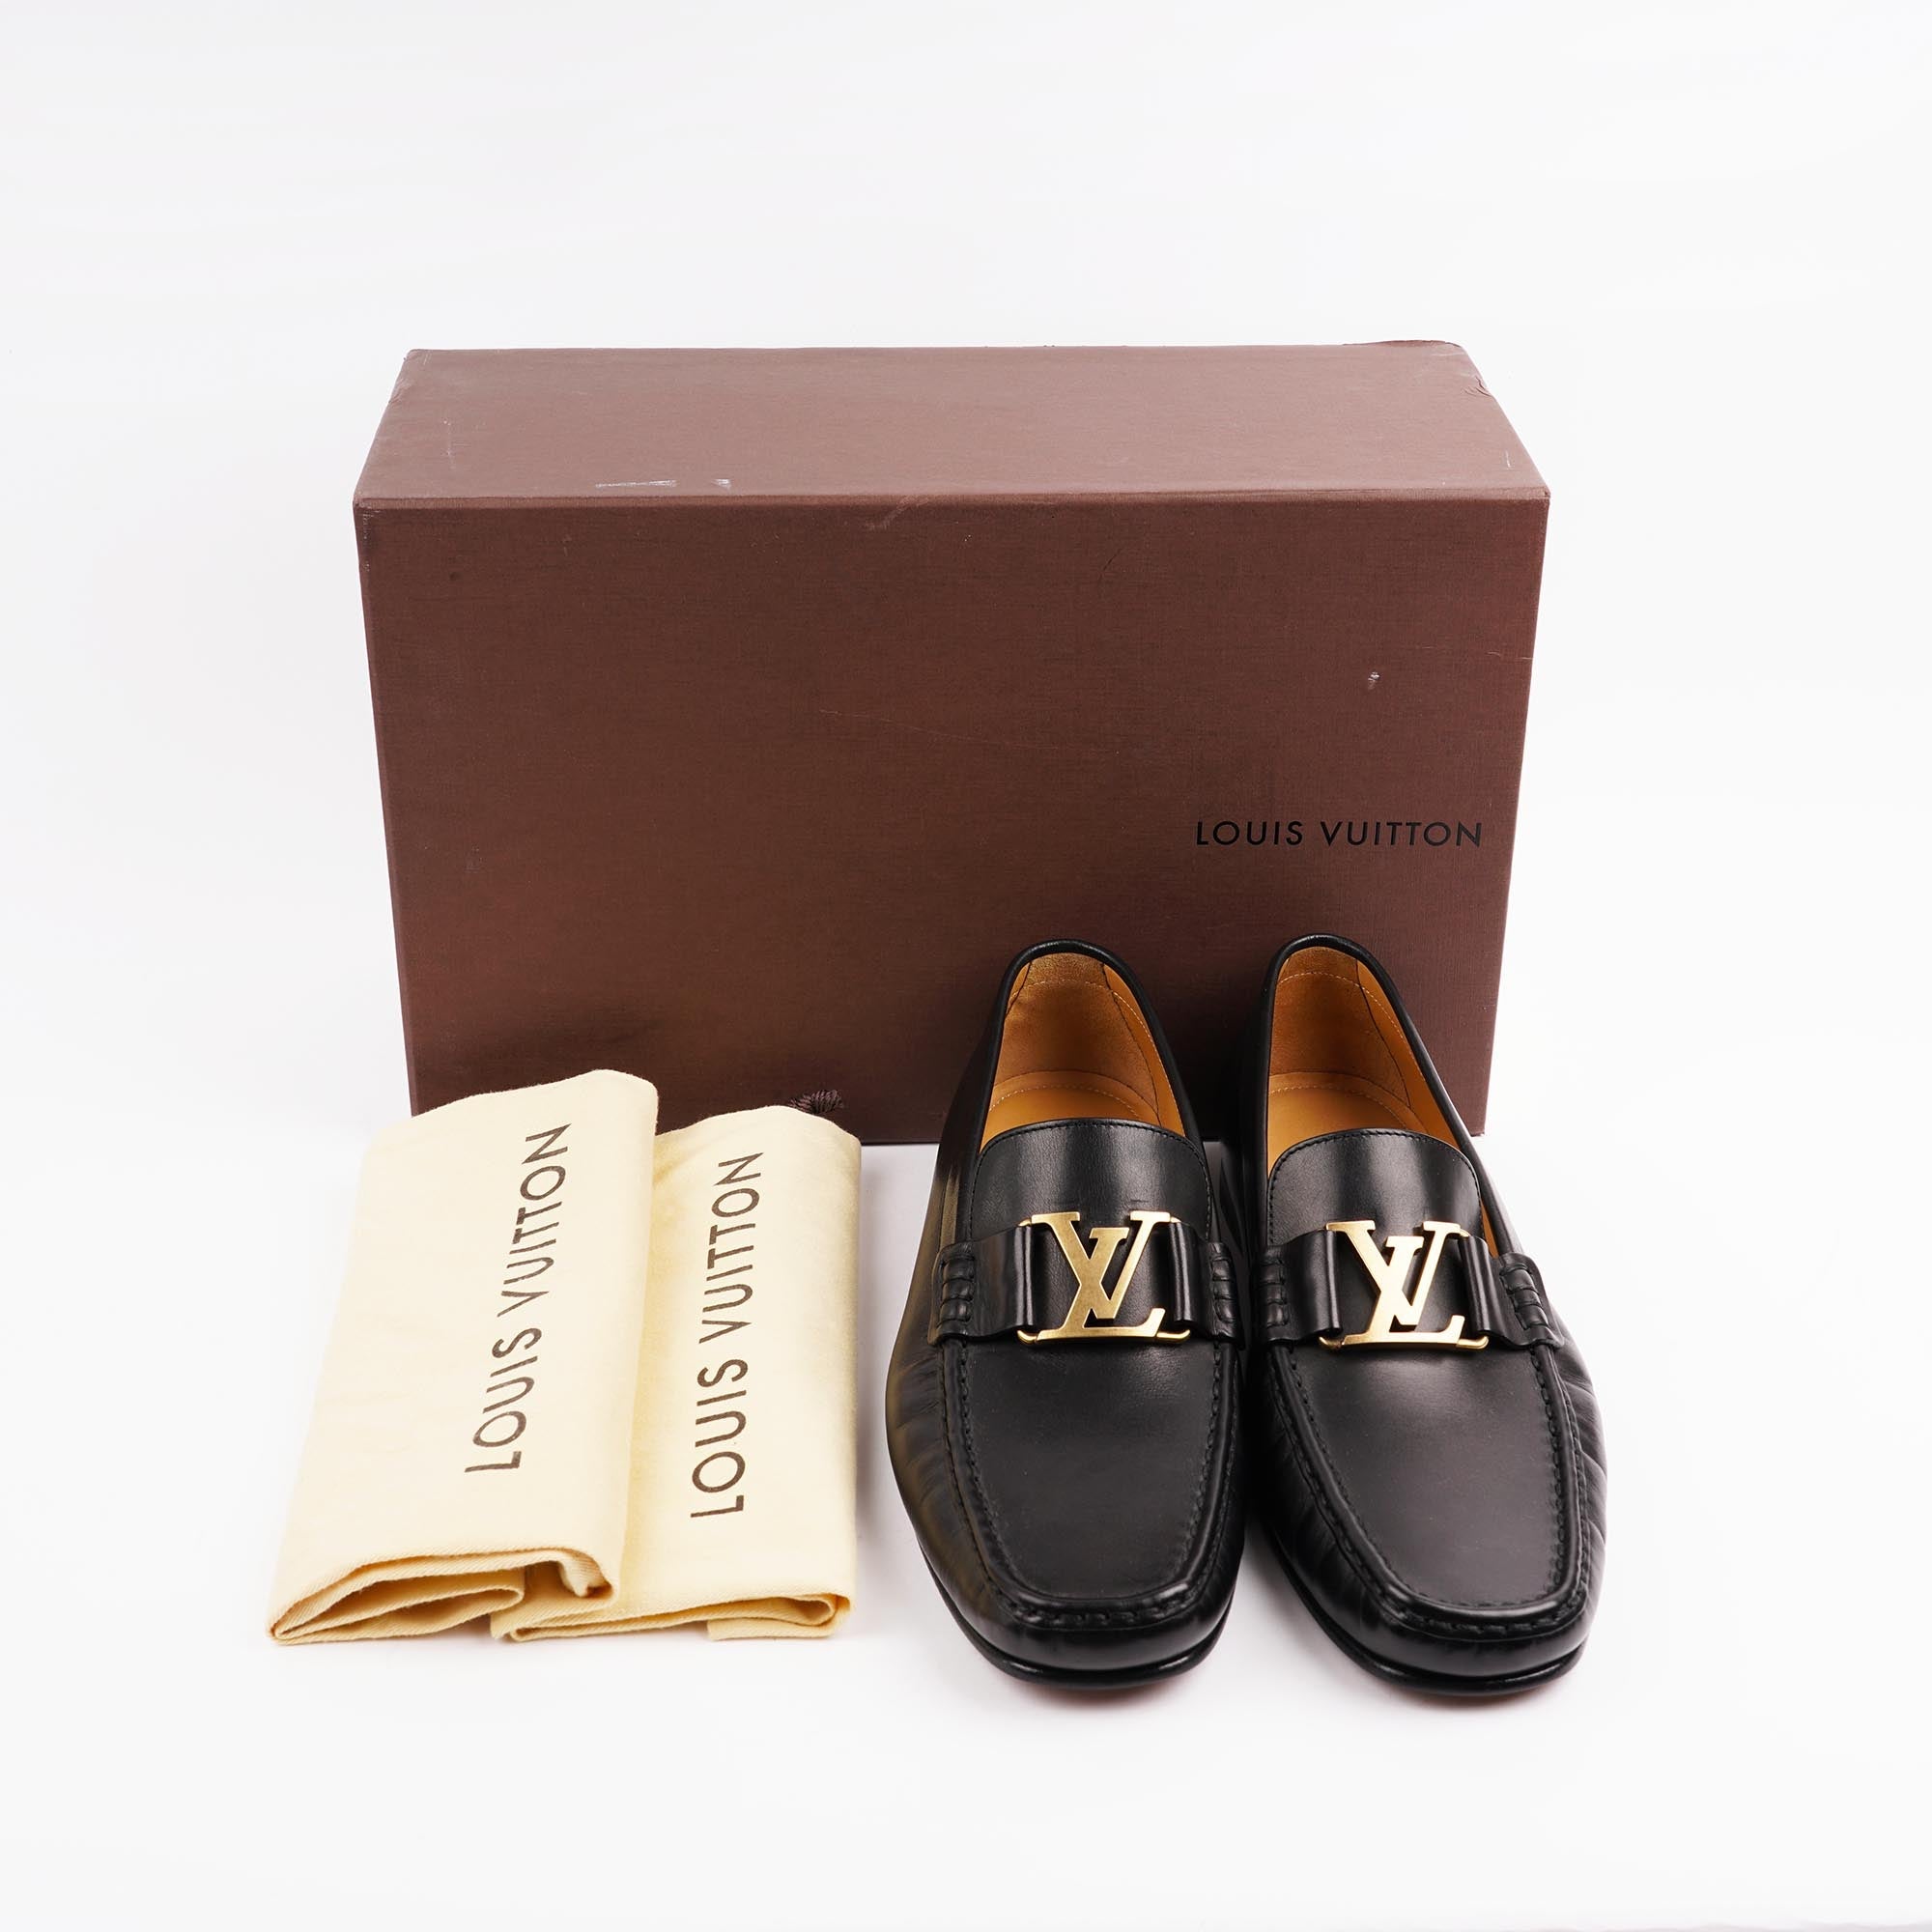 Montaigne Men's Loafers 39 - LOUIS VUITTON - Affordable Luxury image